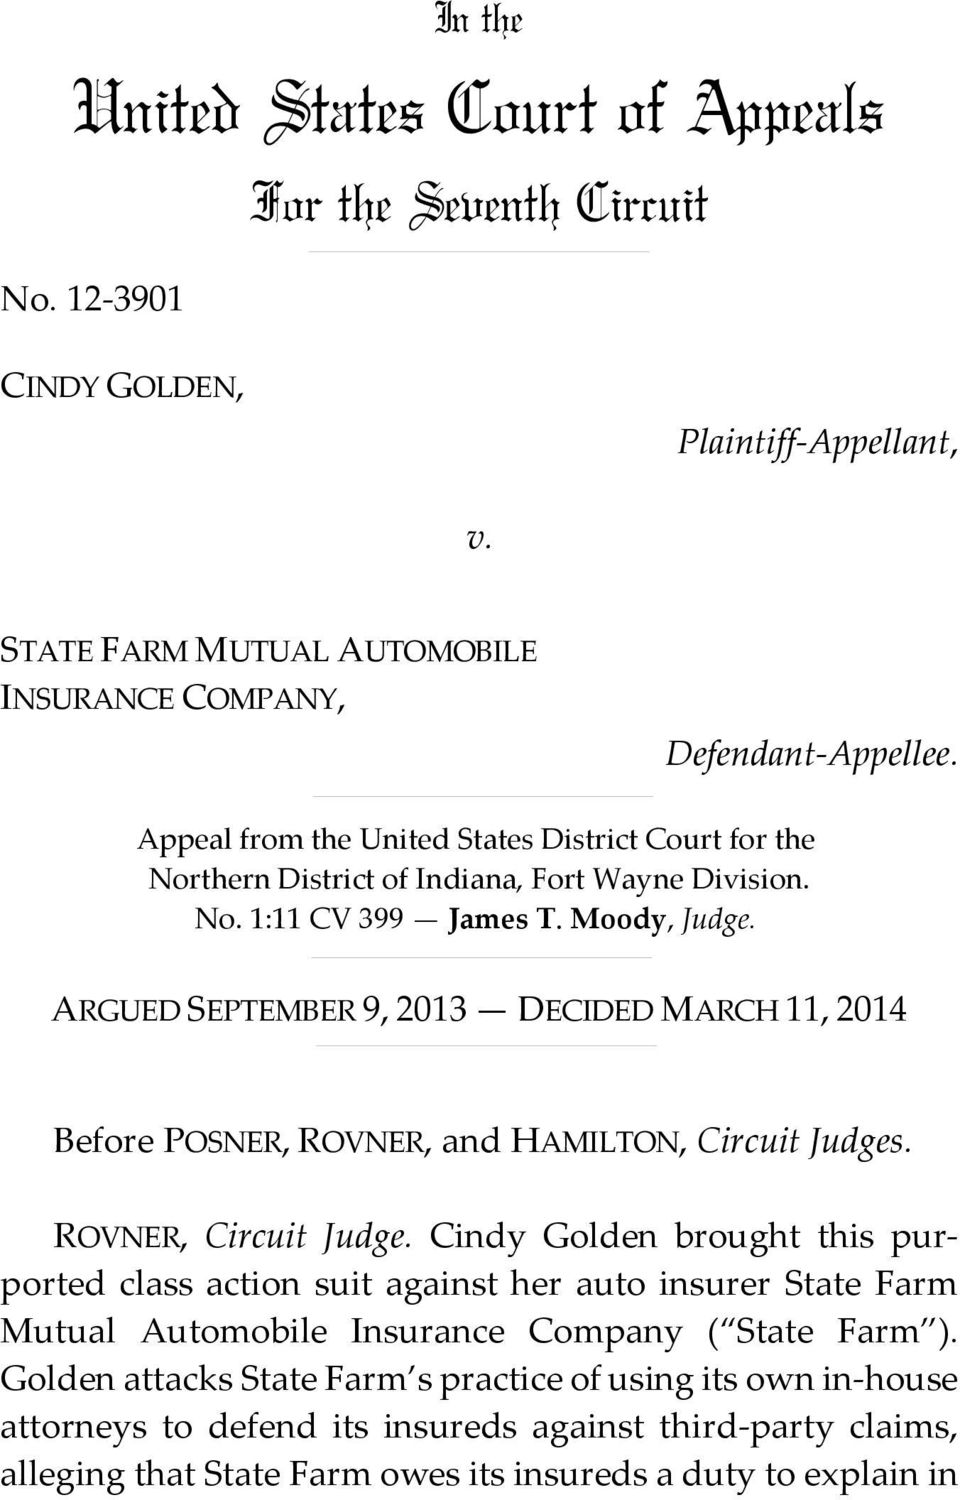 ARGUED SEPTEMBER 9, 2013 DECIDED MARCH 11, 2014 Before POSNER, ROVNER, and HAMILTON, Circuit Judges. ROVNER, Circuit Judge.